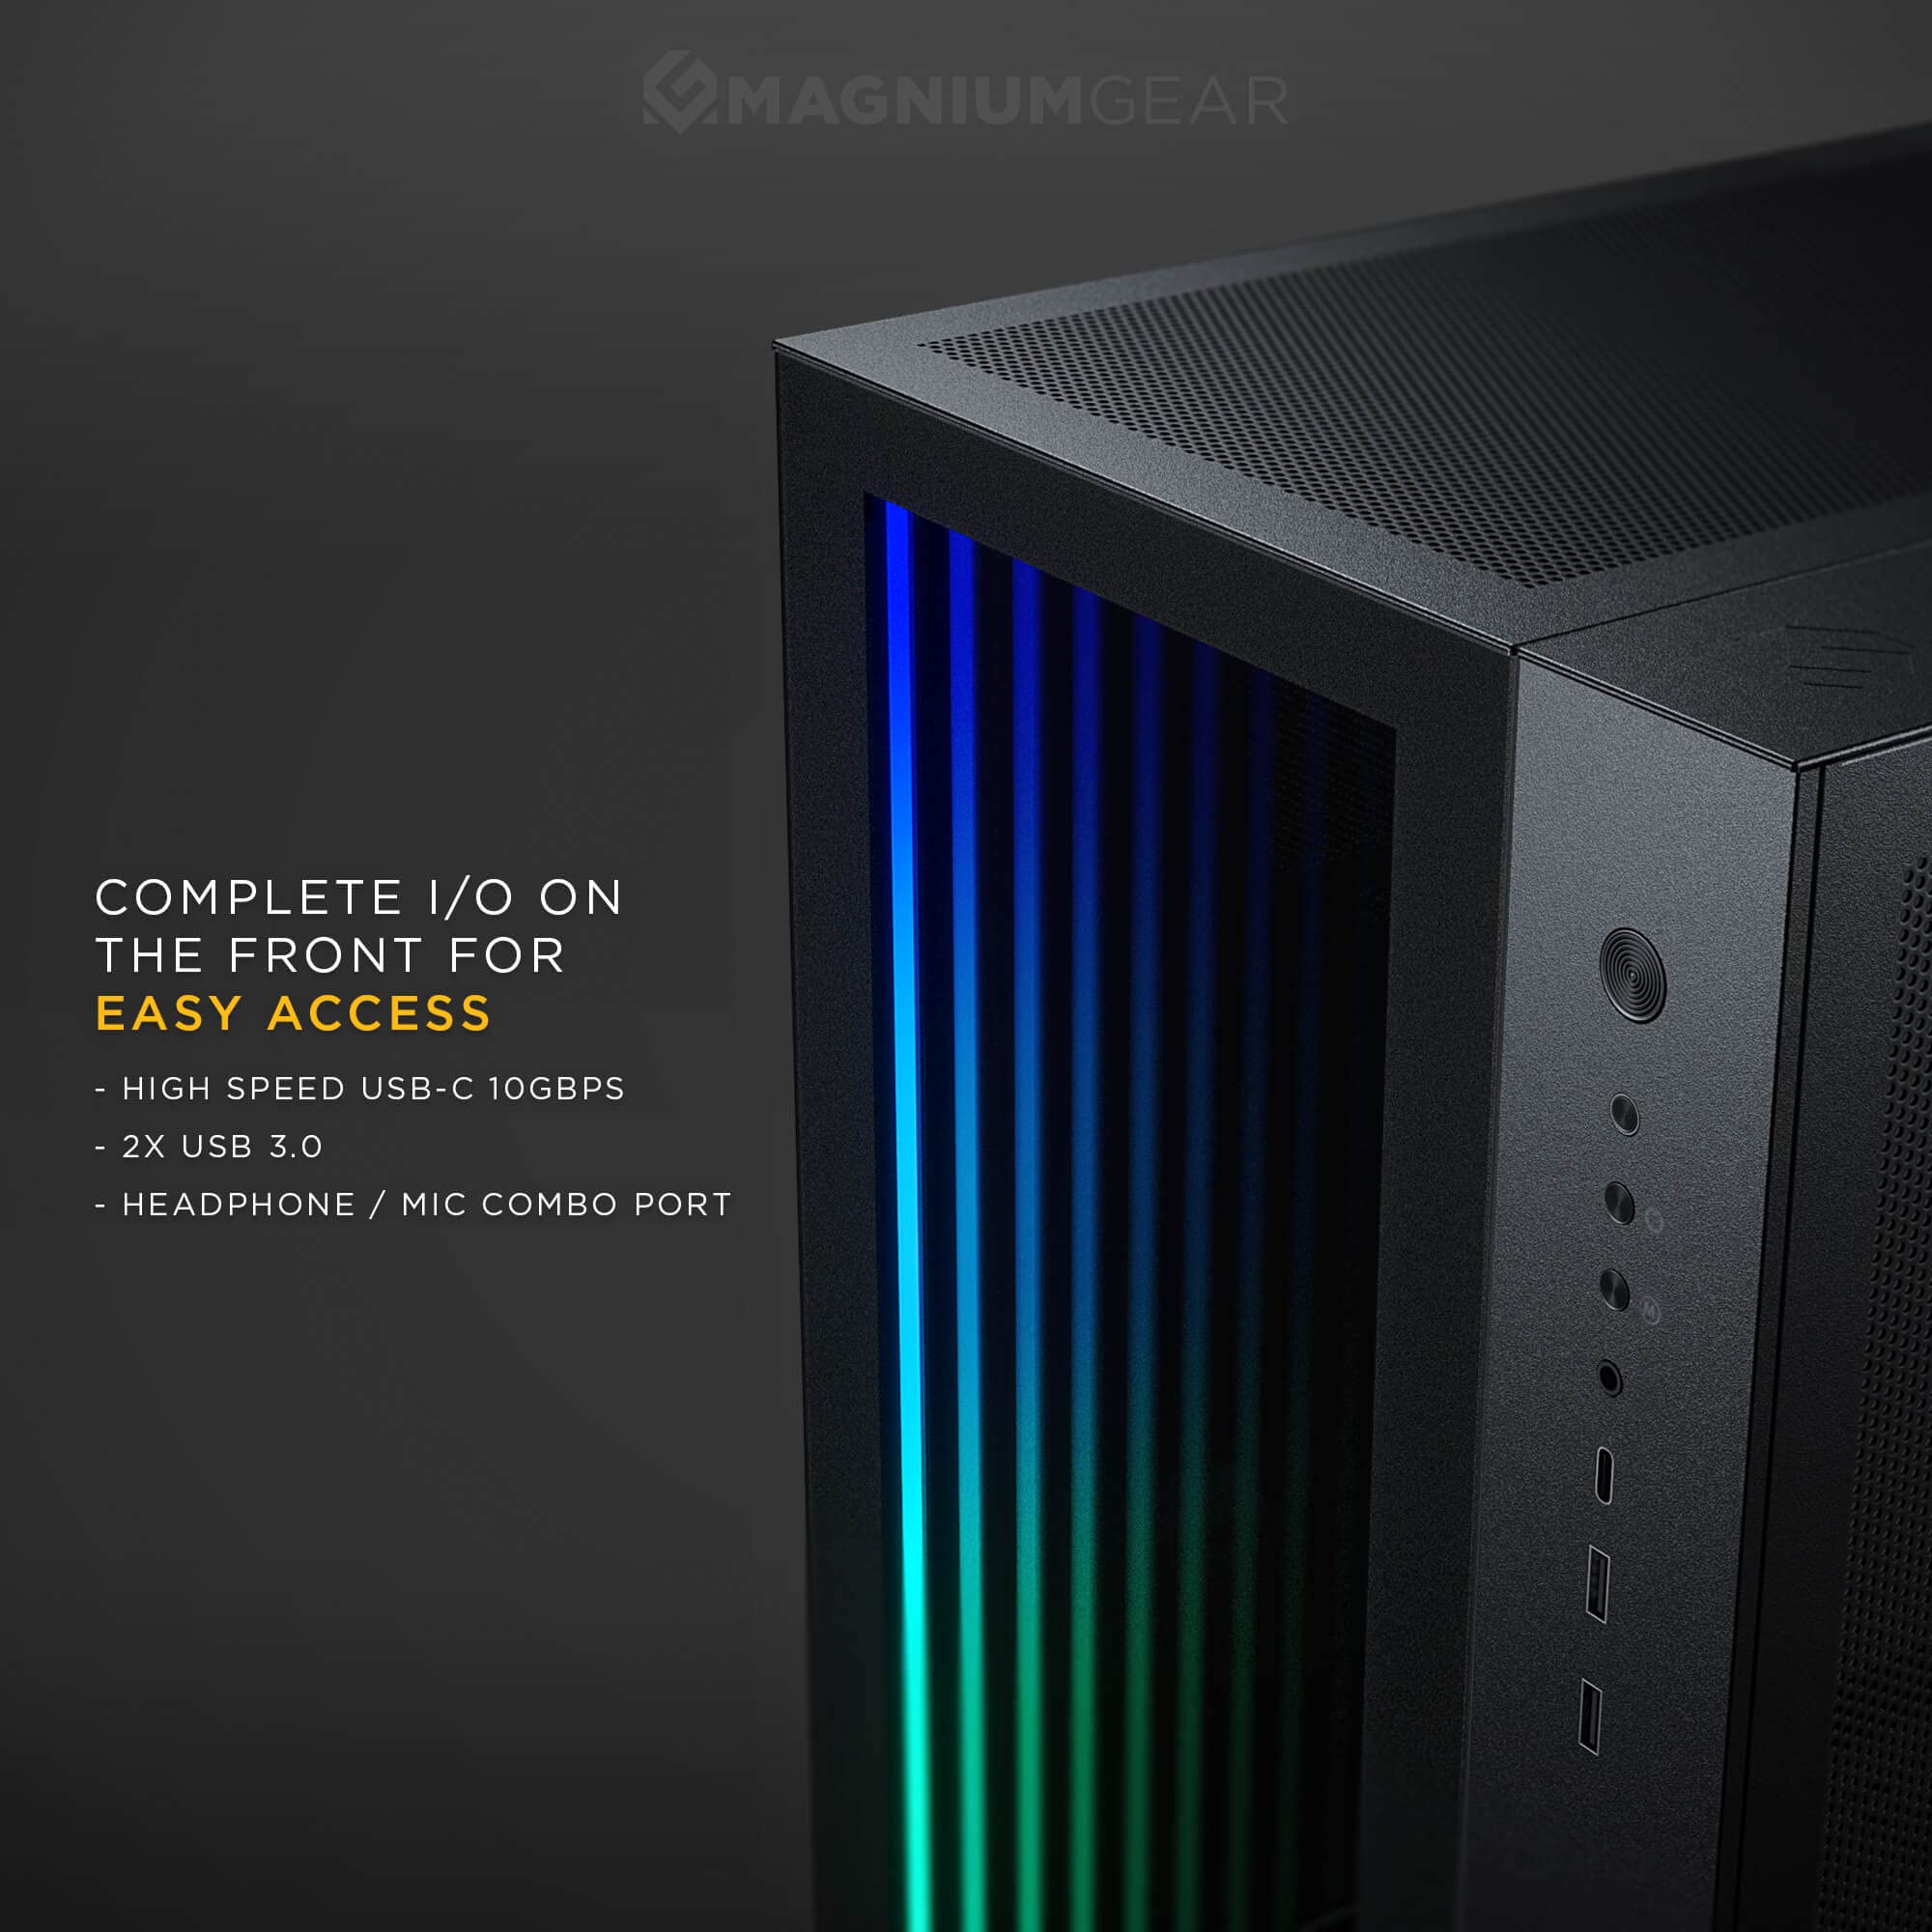 MagniumGear NEO Qube 2 IM, Dual Chamber ATX Mid-tower, Digital-RGB Infinity Mirror Front Panel, Front I/O USB Type C, Tempered Glass Panels, Black $119.99